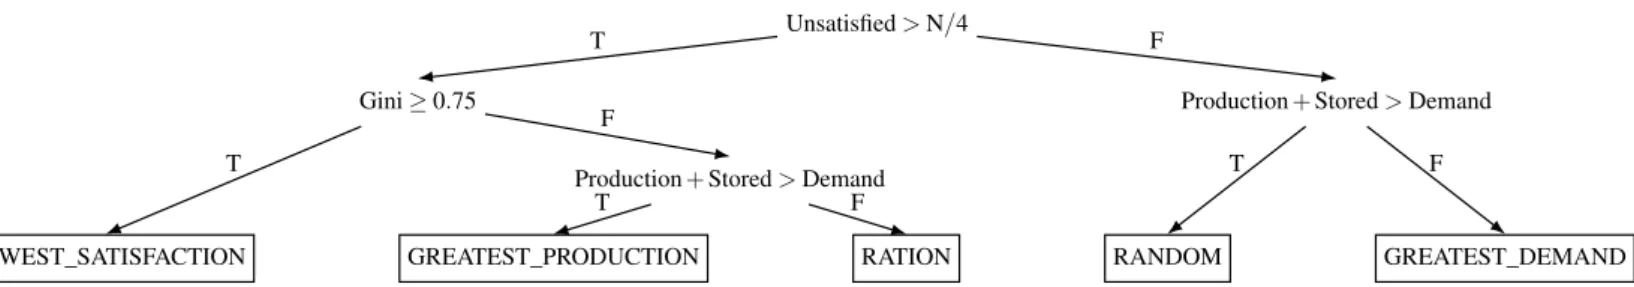 Figure 3.4: Default decision tree encapsulating rules which determine how the central system redistributes energy